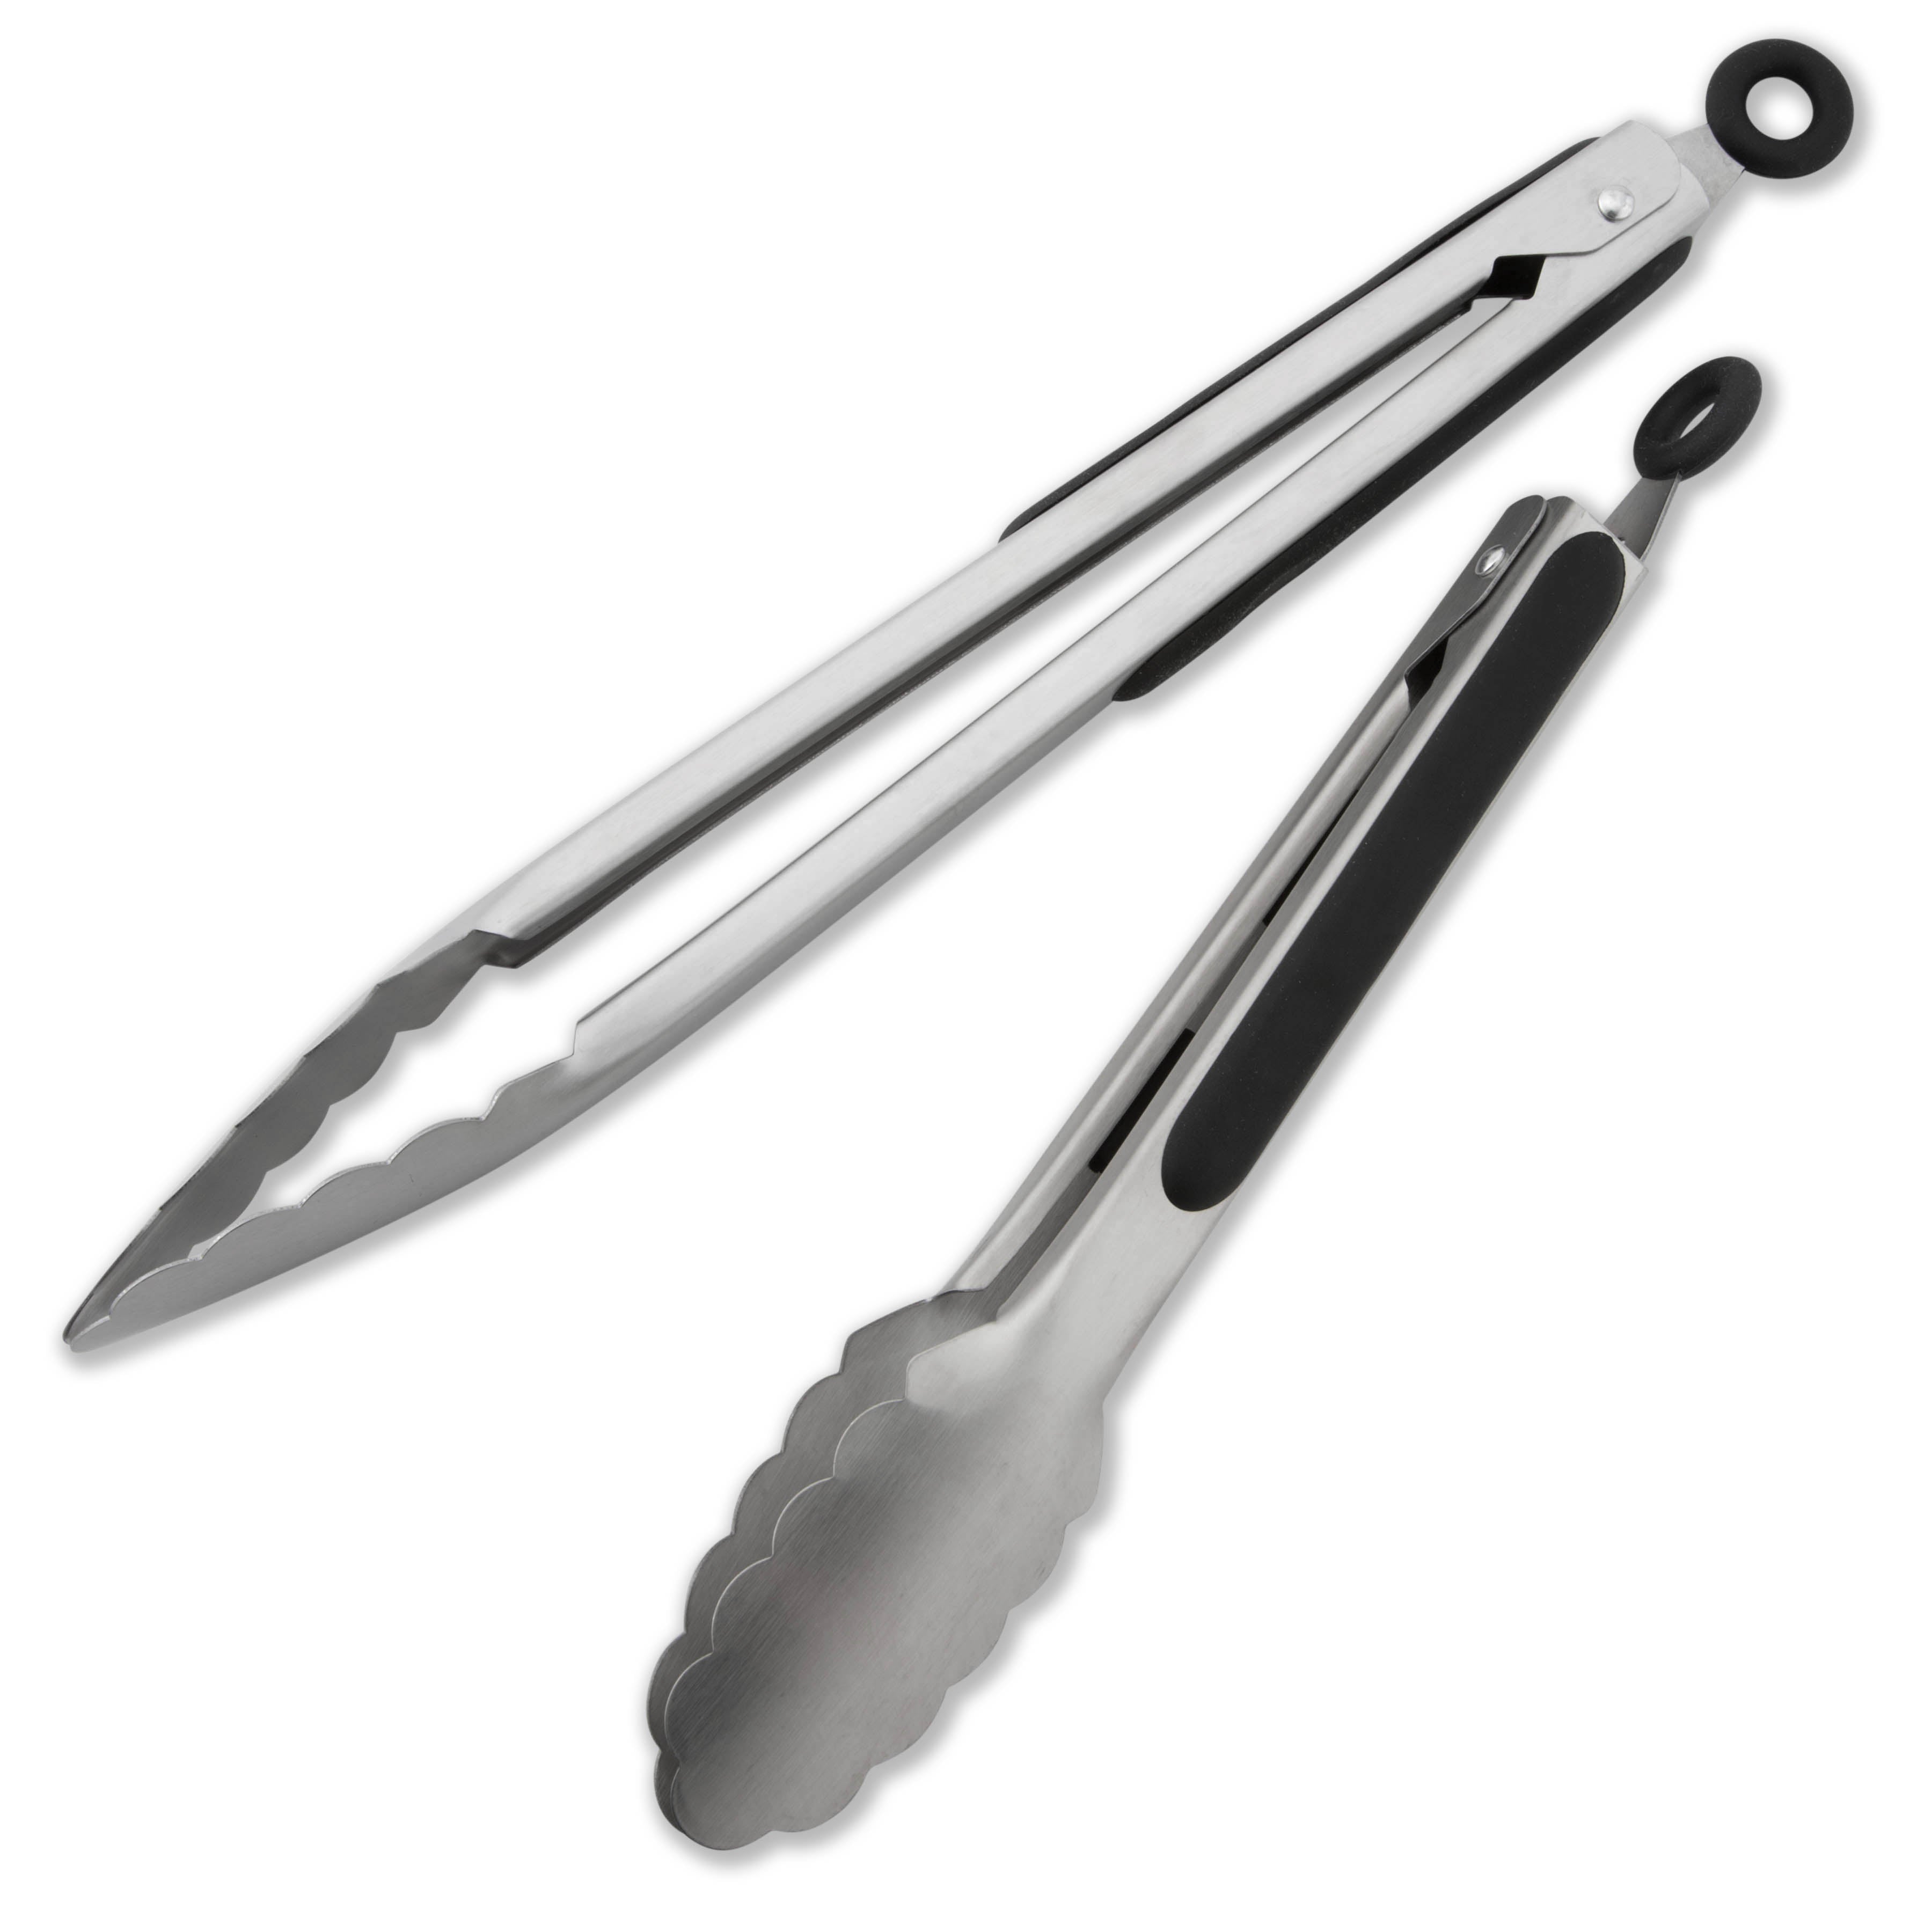 STARUBY Cooking Tongs 9 inches and 12 inches Stainless Steel